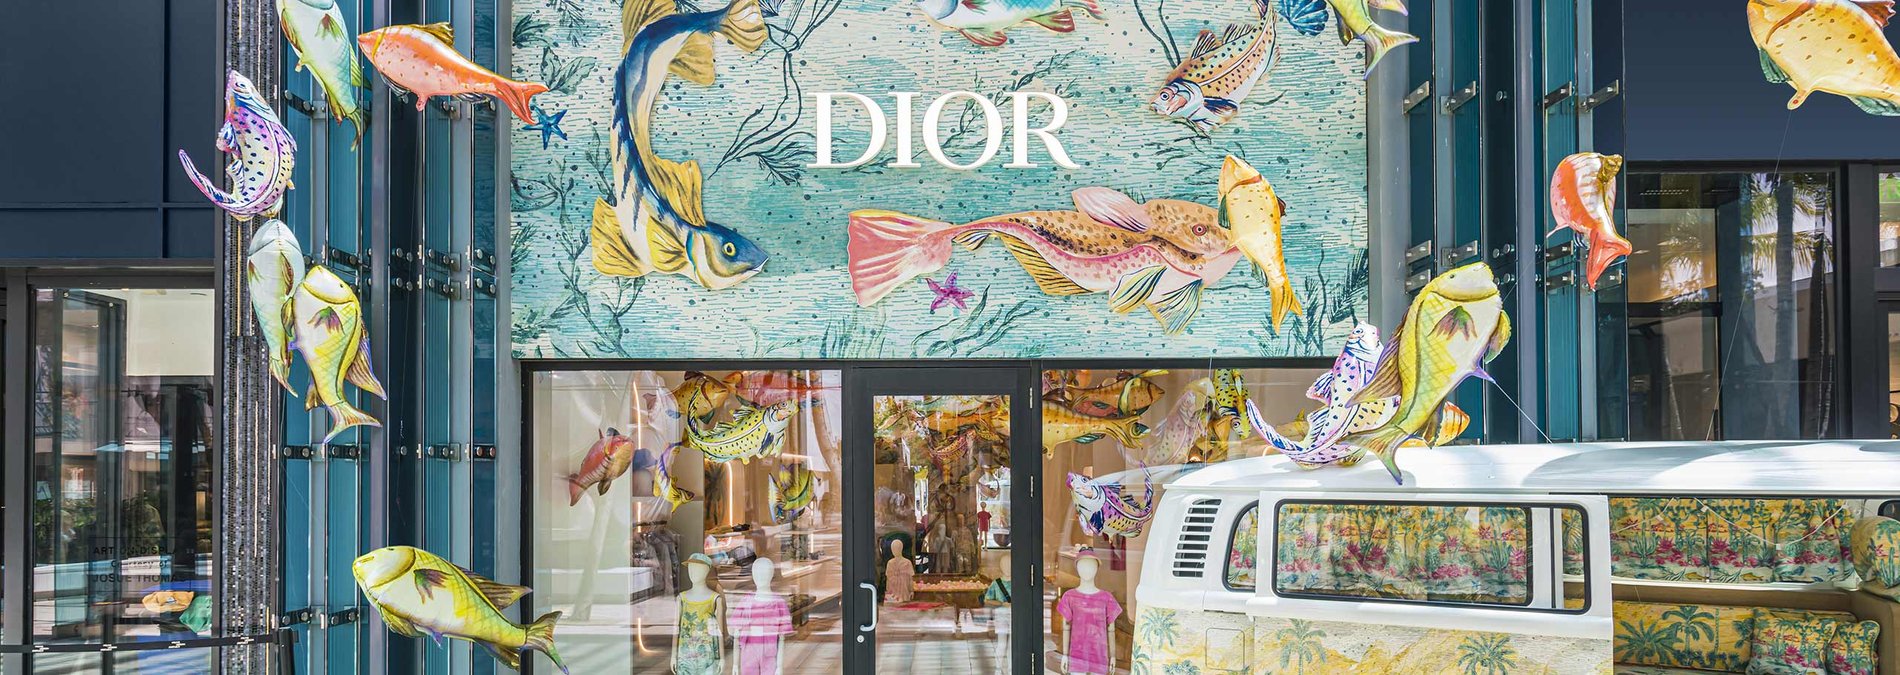 First Four Corners completed as DIOR opens in Miami Design District